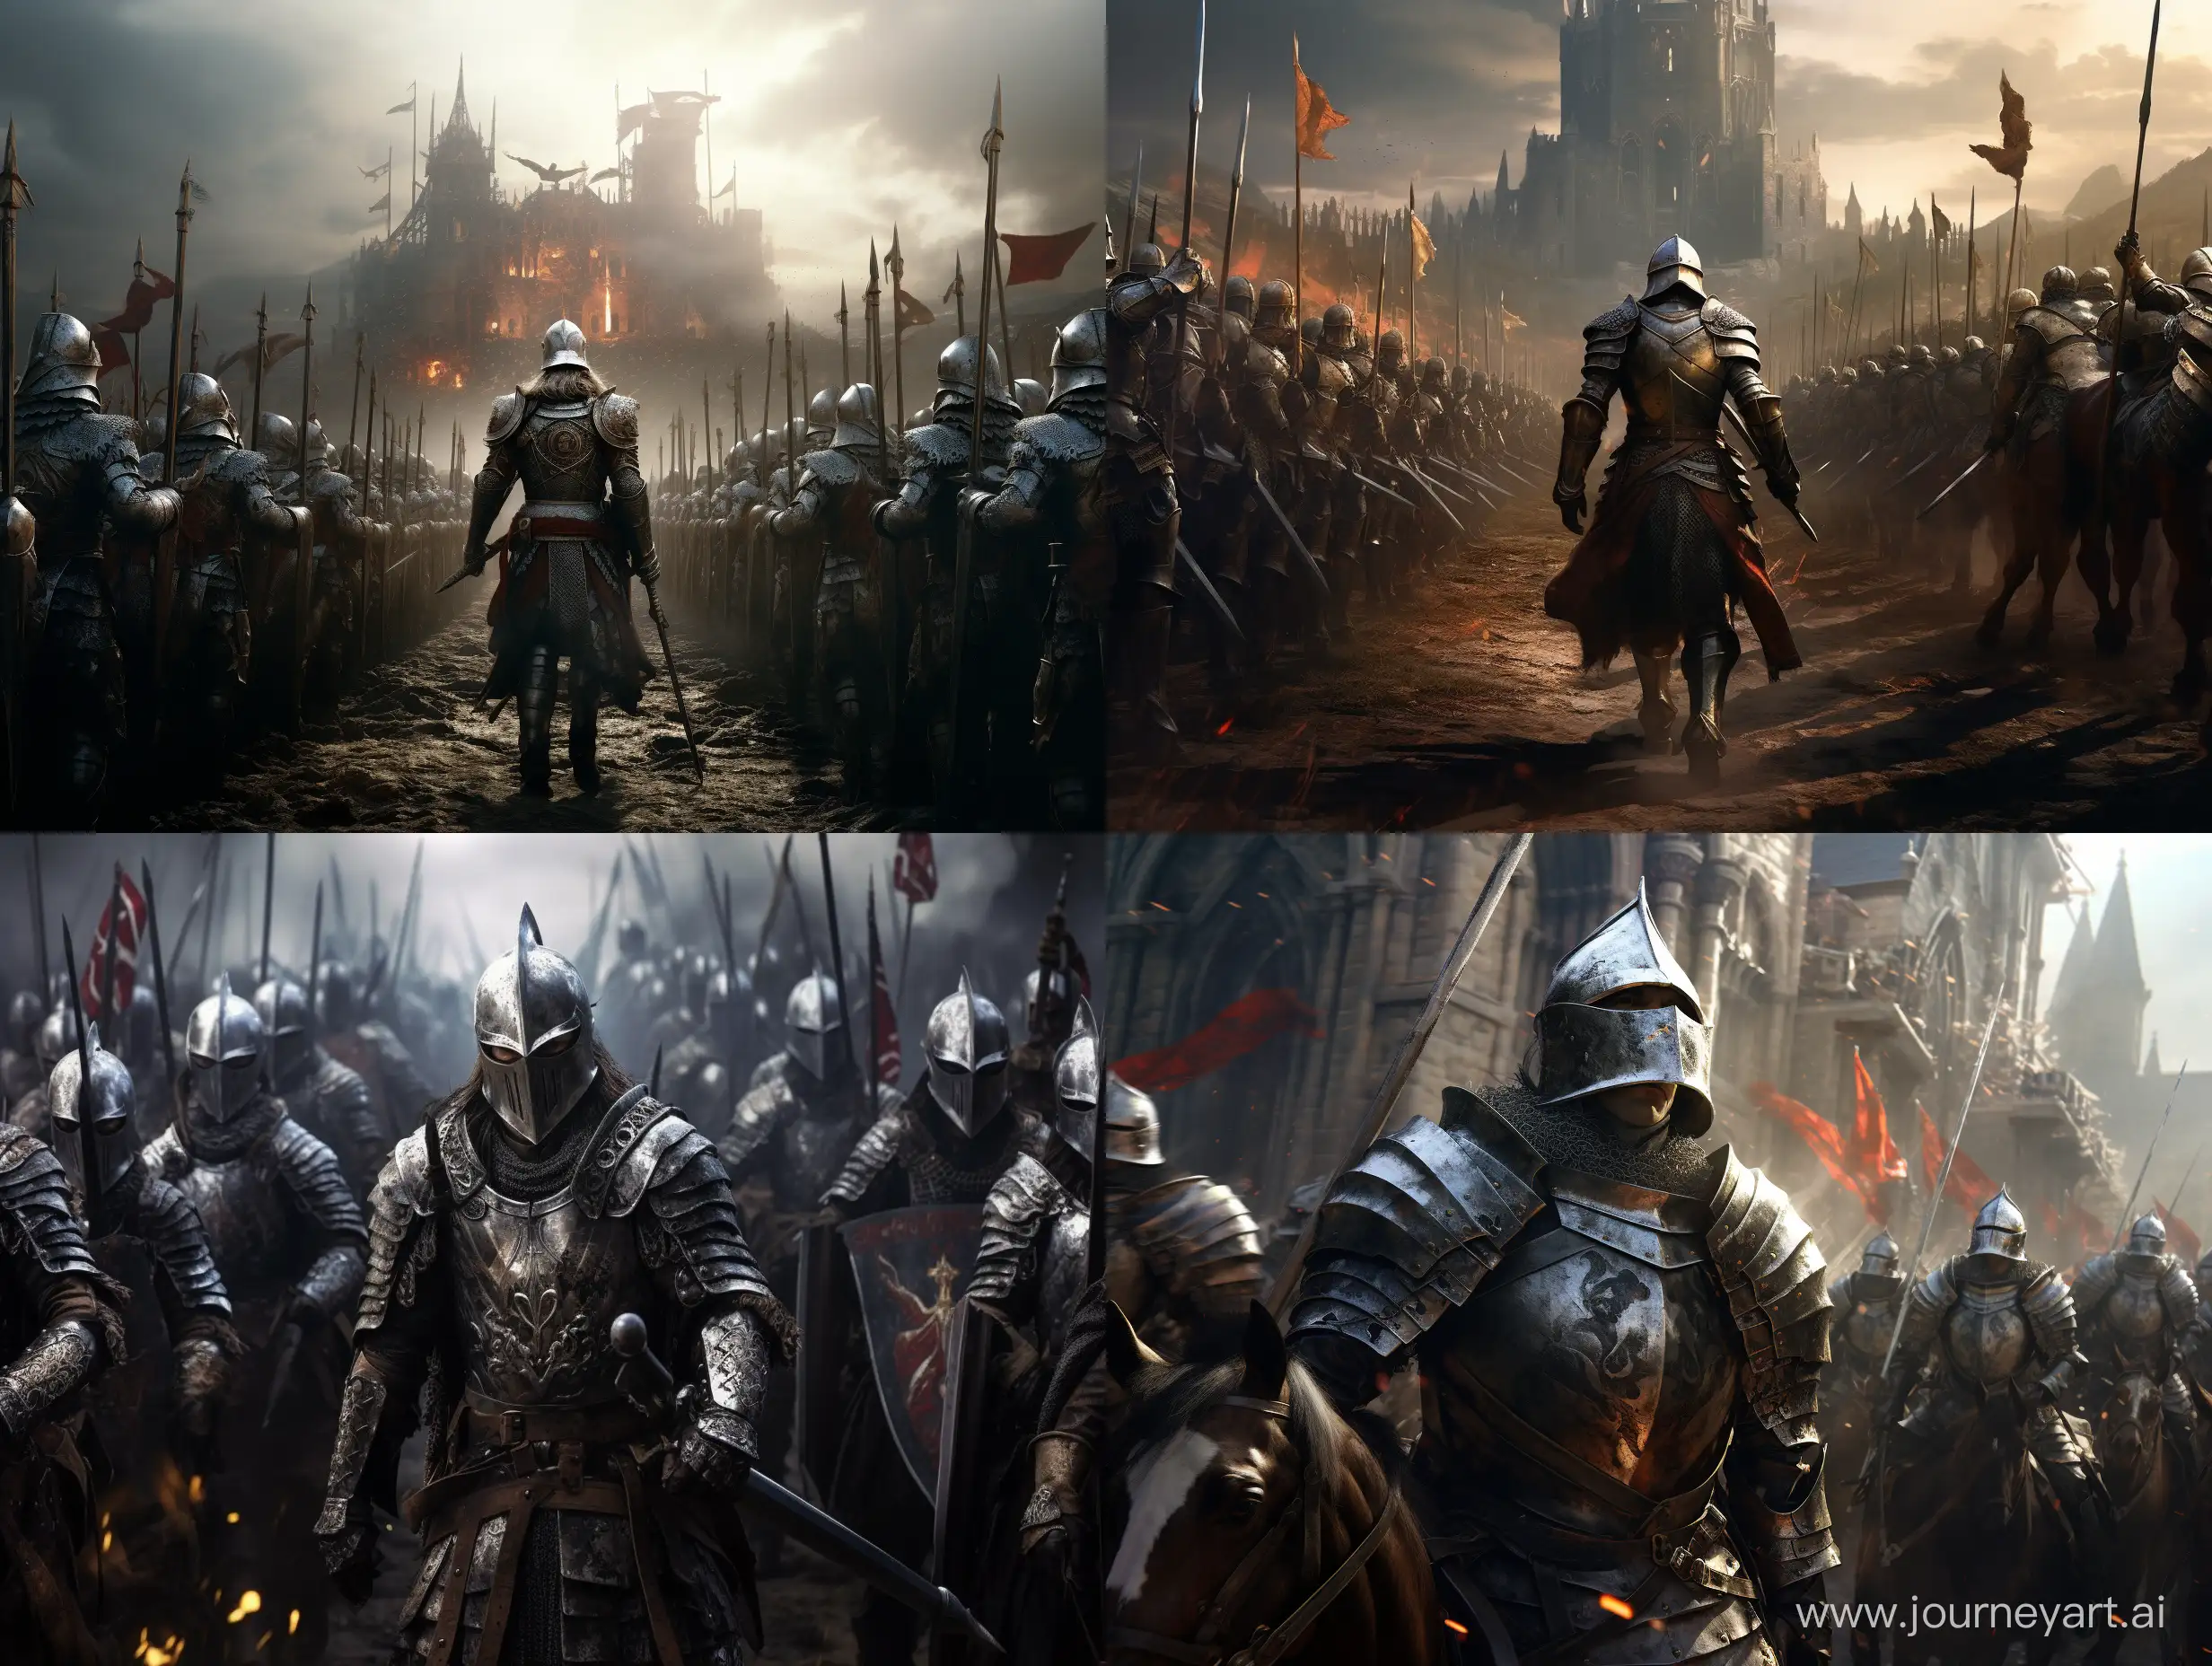 Epic-Medieval-Army-Formation-in-43-Aspect-Ratio